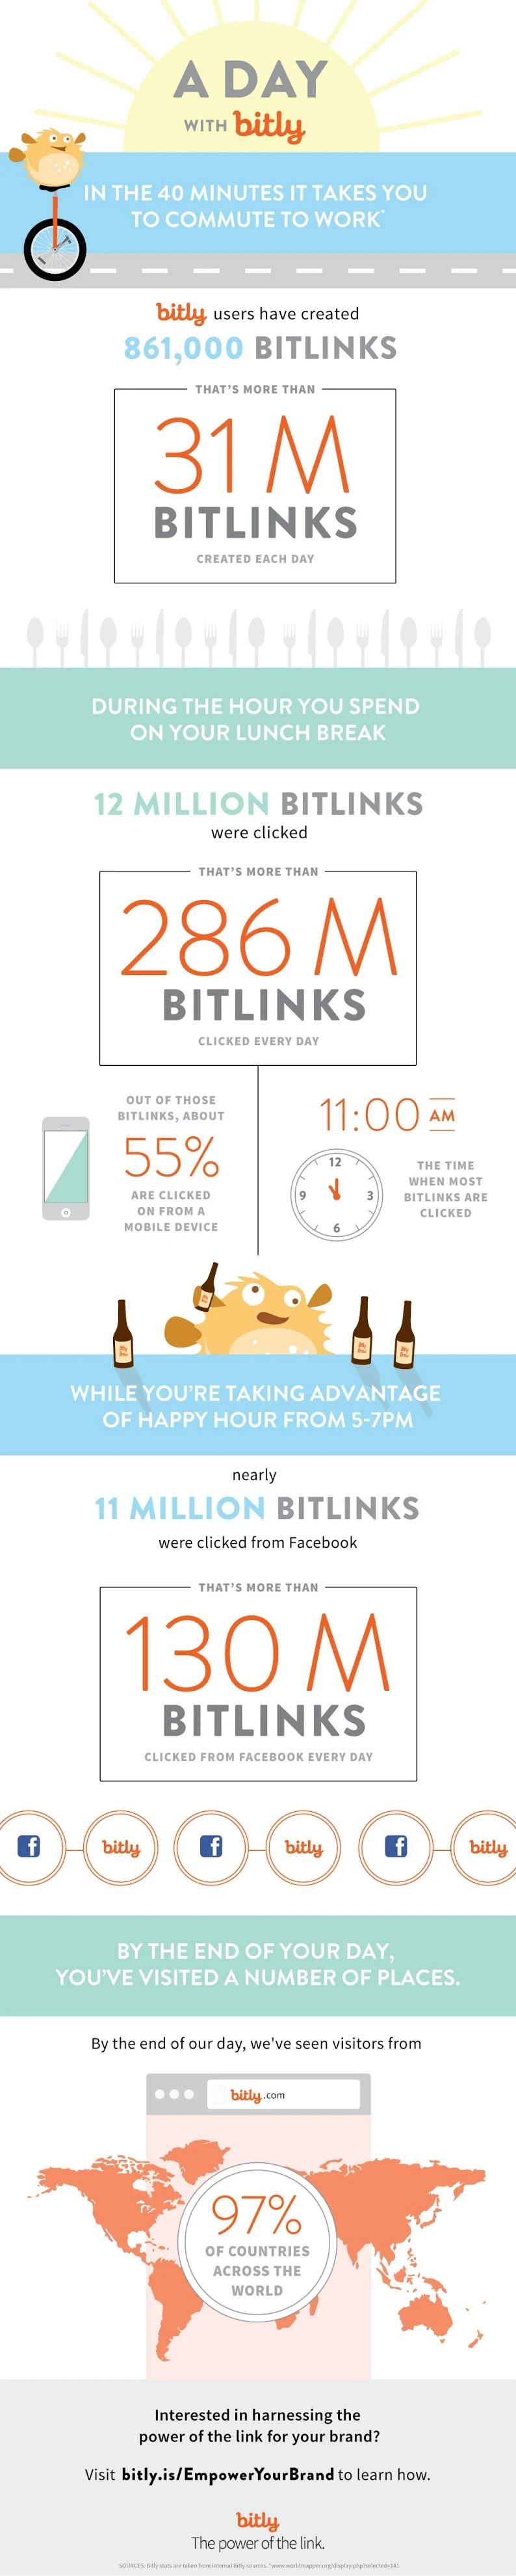 24 Hours With Bitly [Infographic]